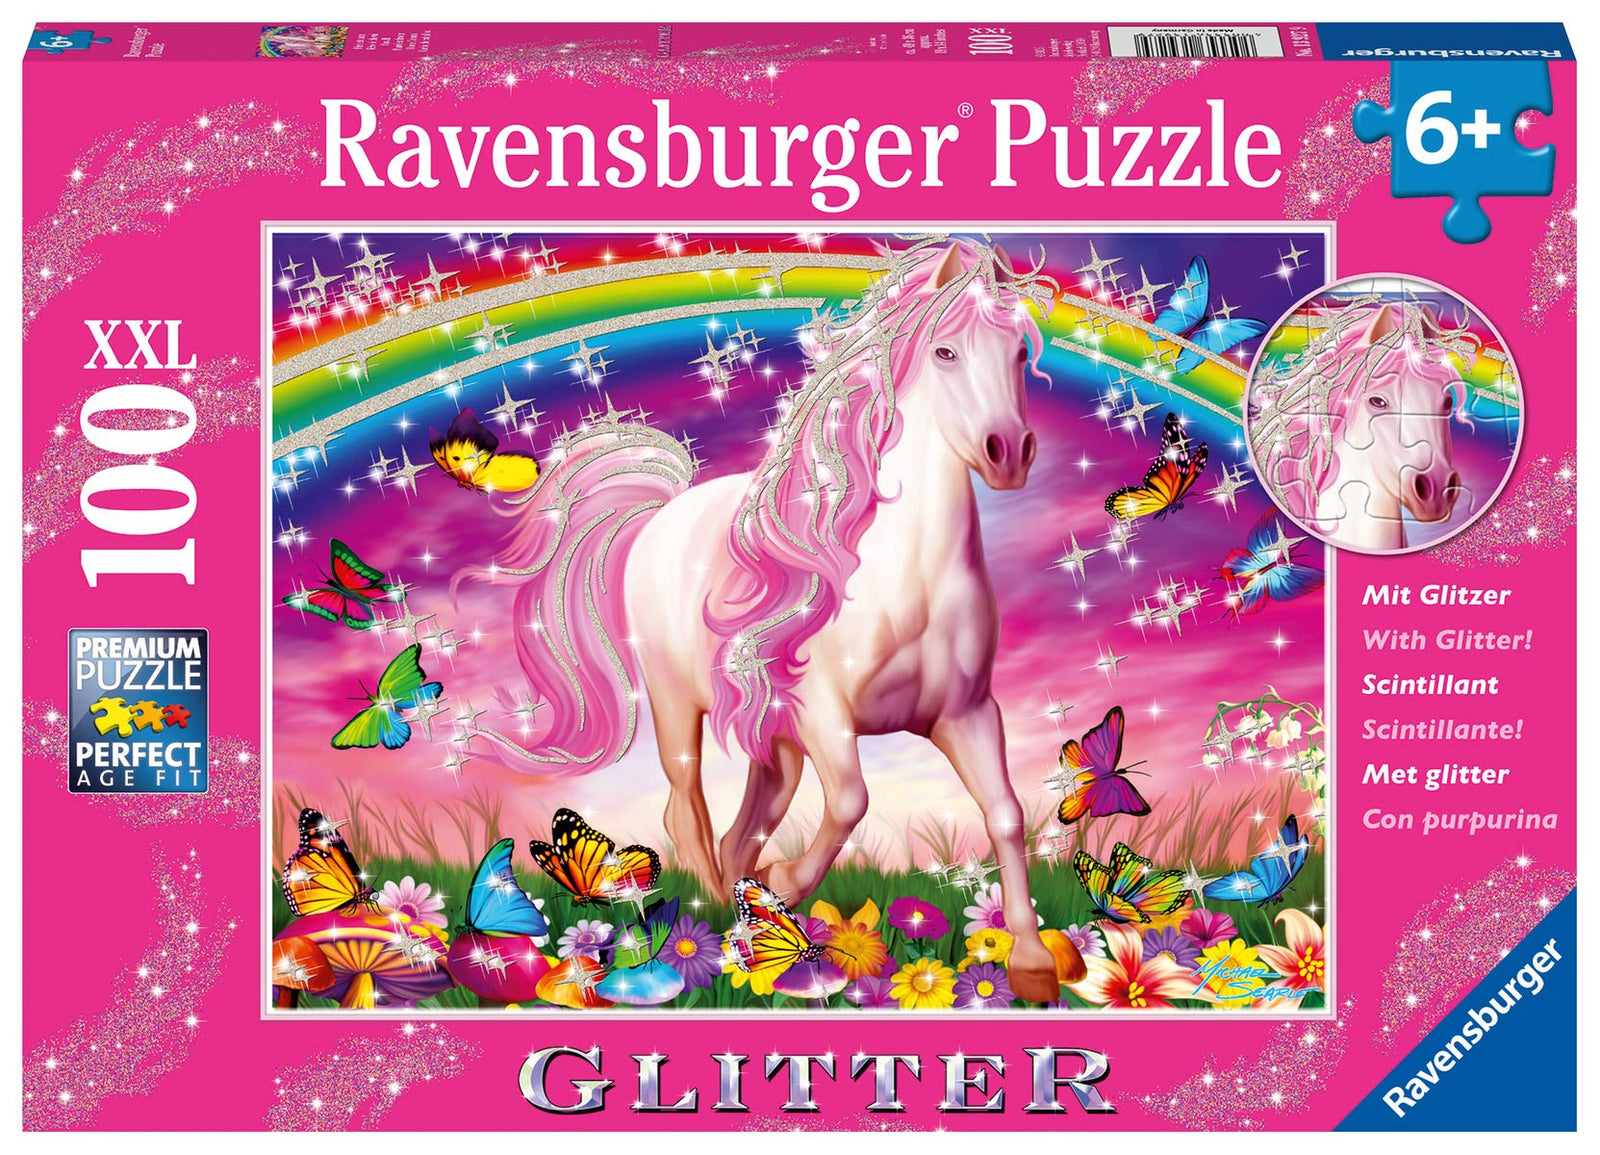 Ravensburger Horse Dreams - 100 Piece Glitter Jigsaw Puzzle for Kids – Every Piece is Unique, Pieces Fit Together Perfectly